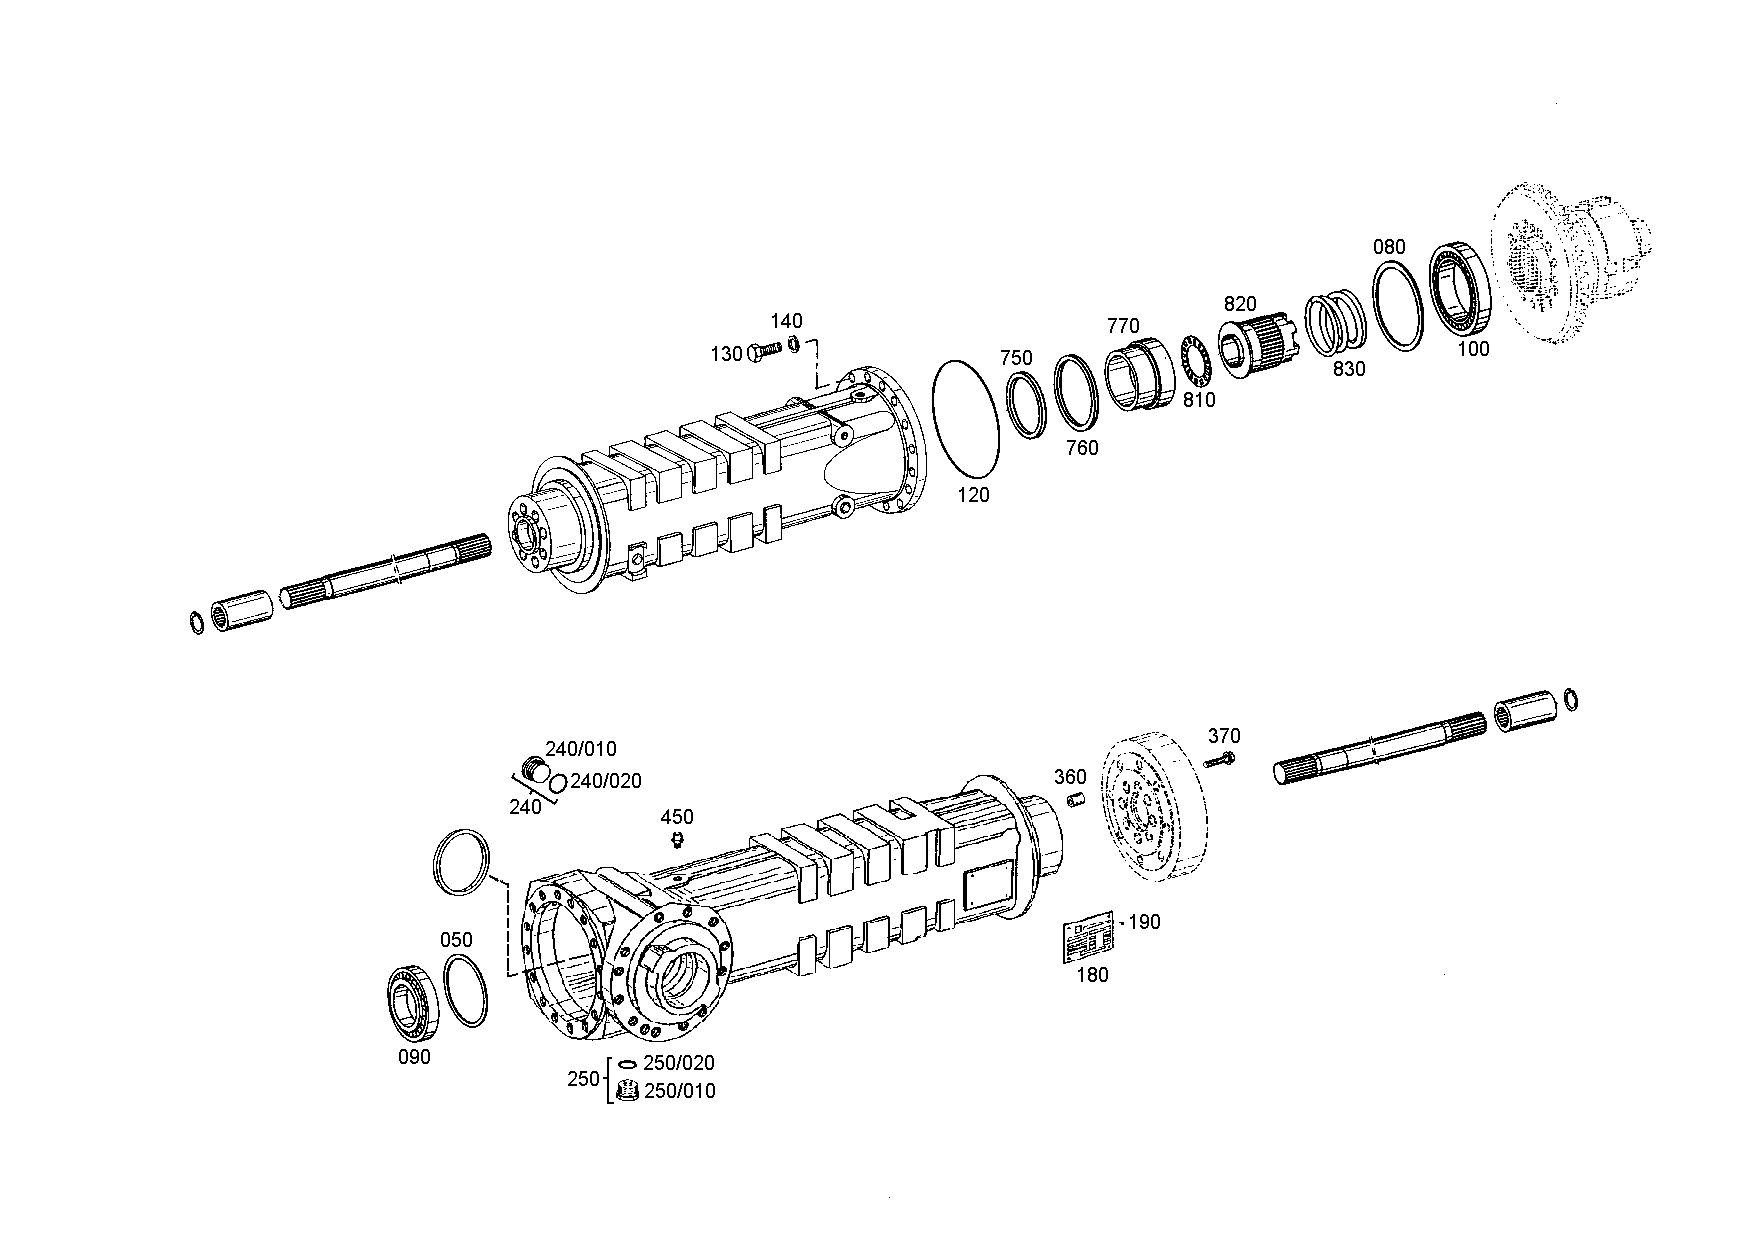 drawing for REFORMWERK 240231938 - AXIAL NEEDLE CAGE (figure 5)